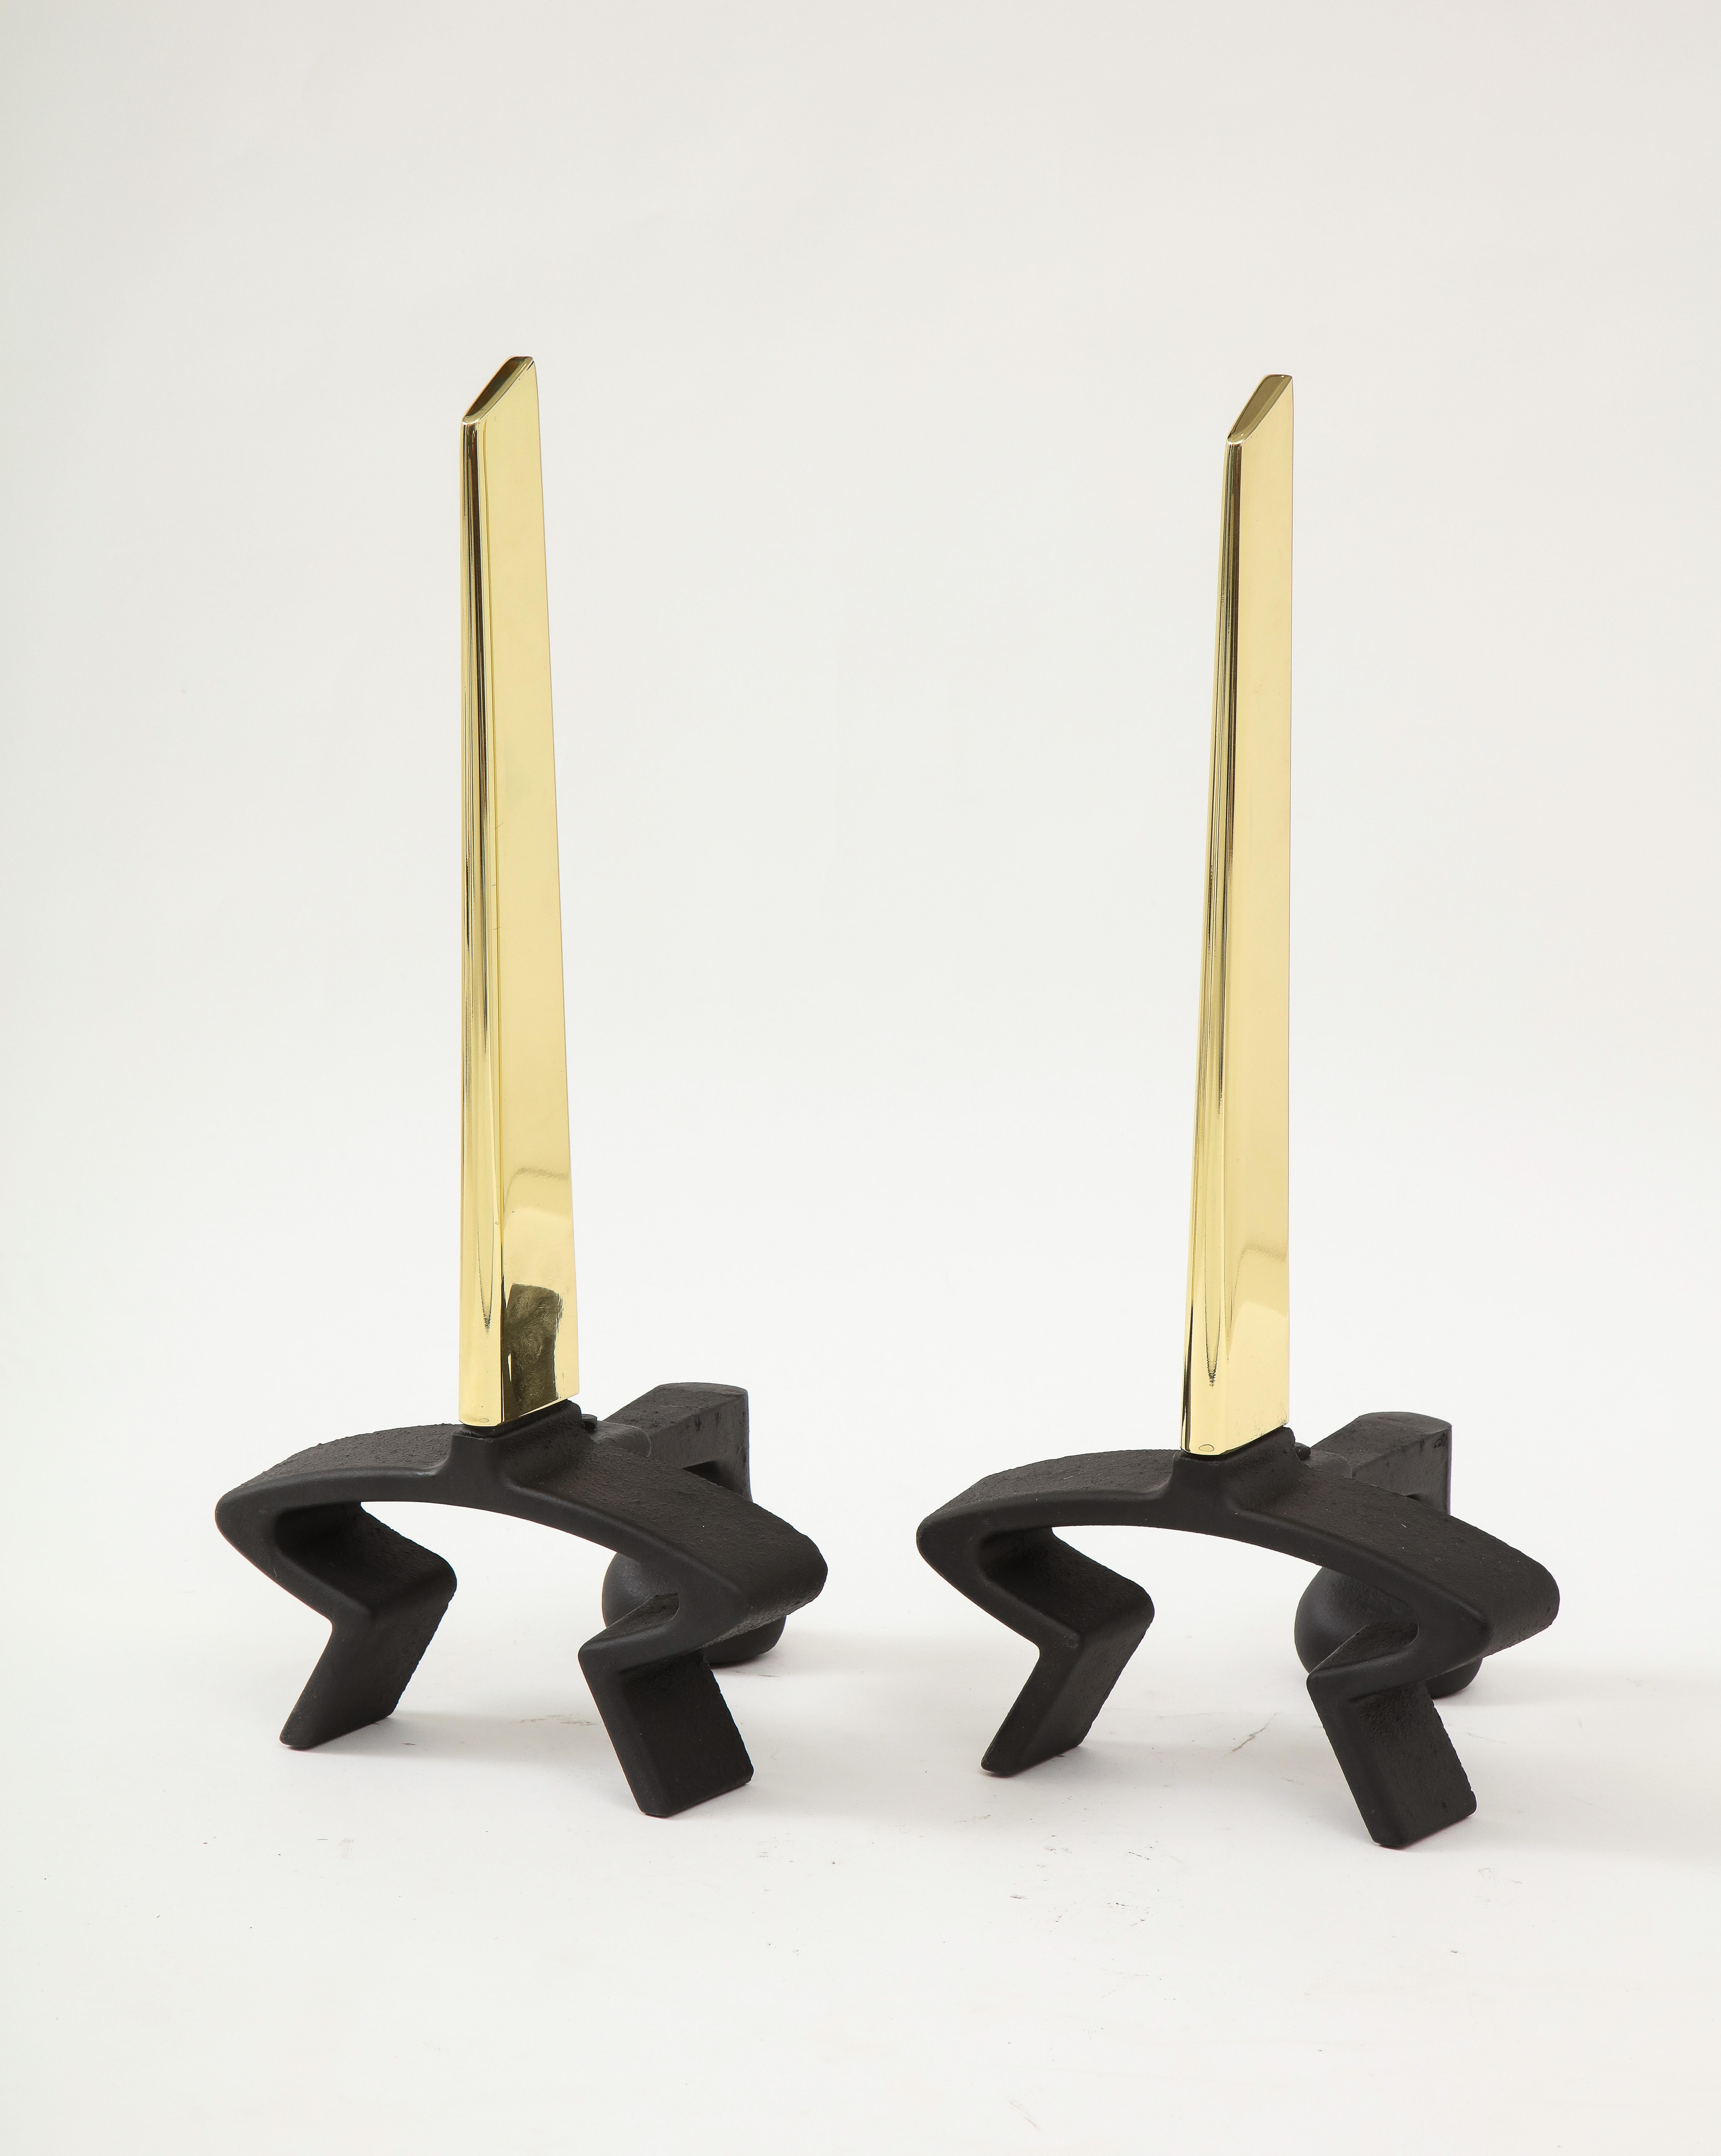 Pair of blackened iron andirons with a polished brass streamlined blade. Designed by Donald Deskey.